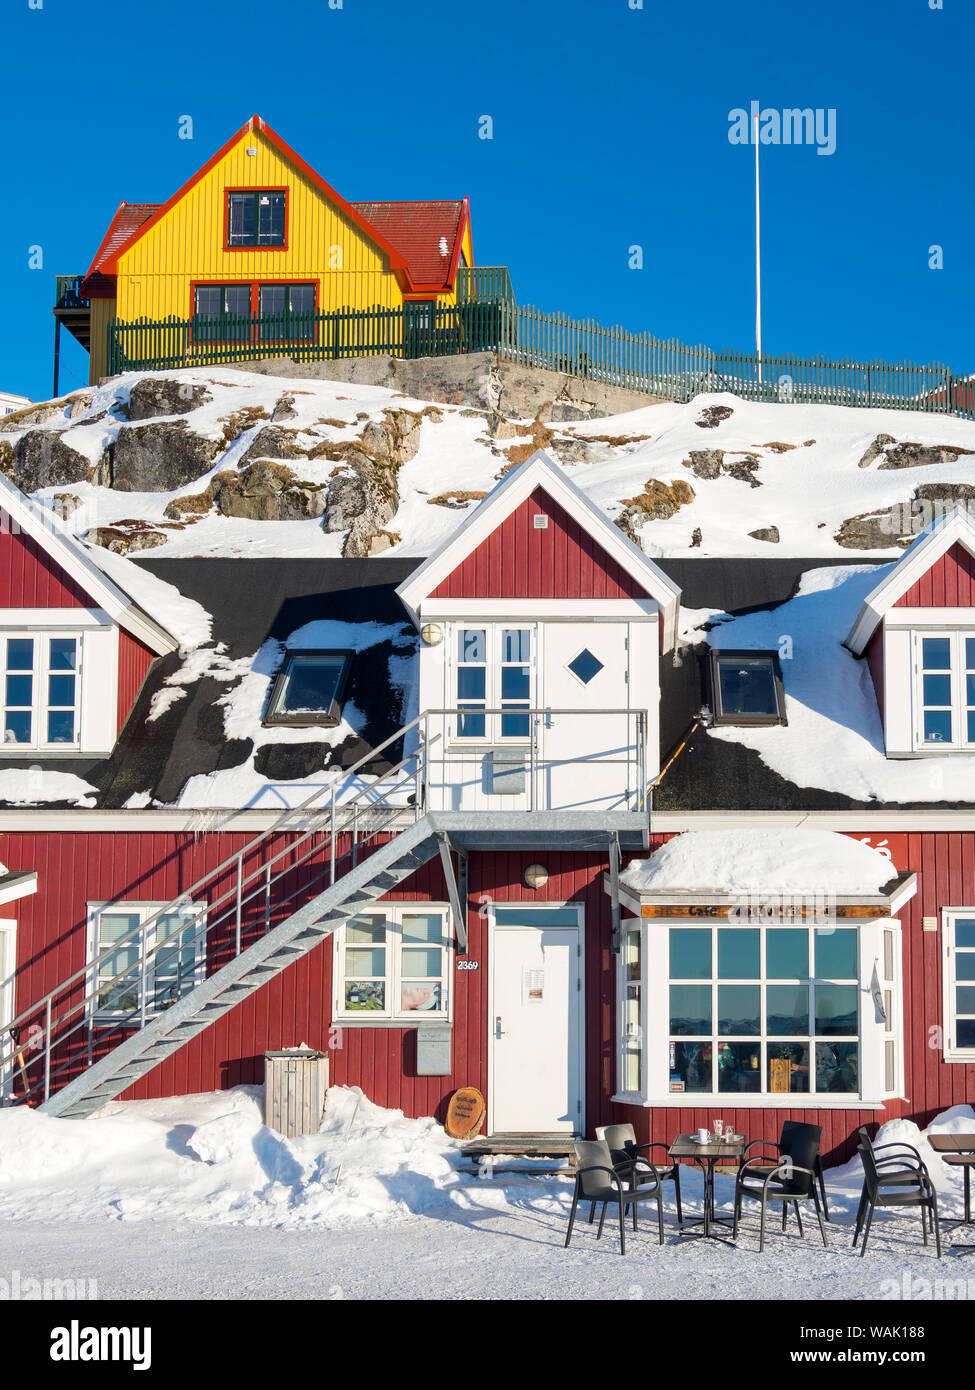 The old town, Nuuk, capital of Greenland. (Editorial Use Only) Stock Photo